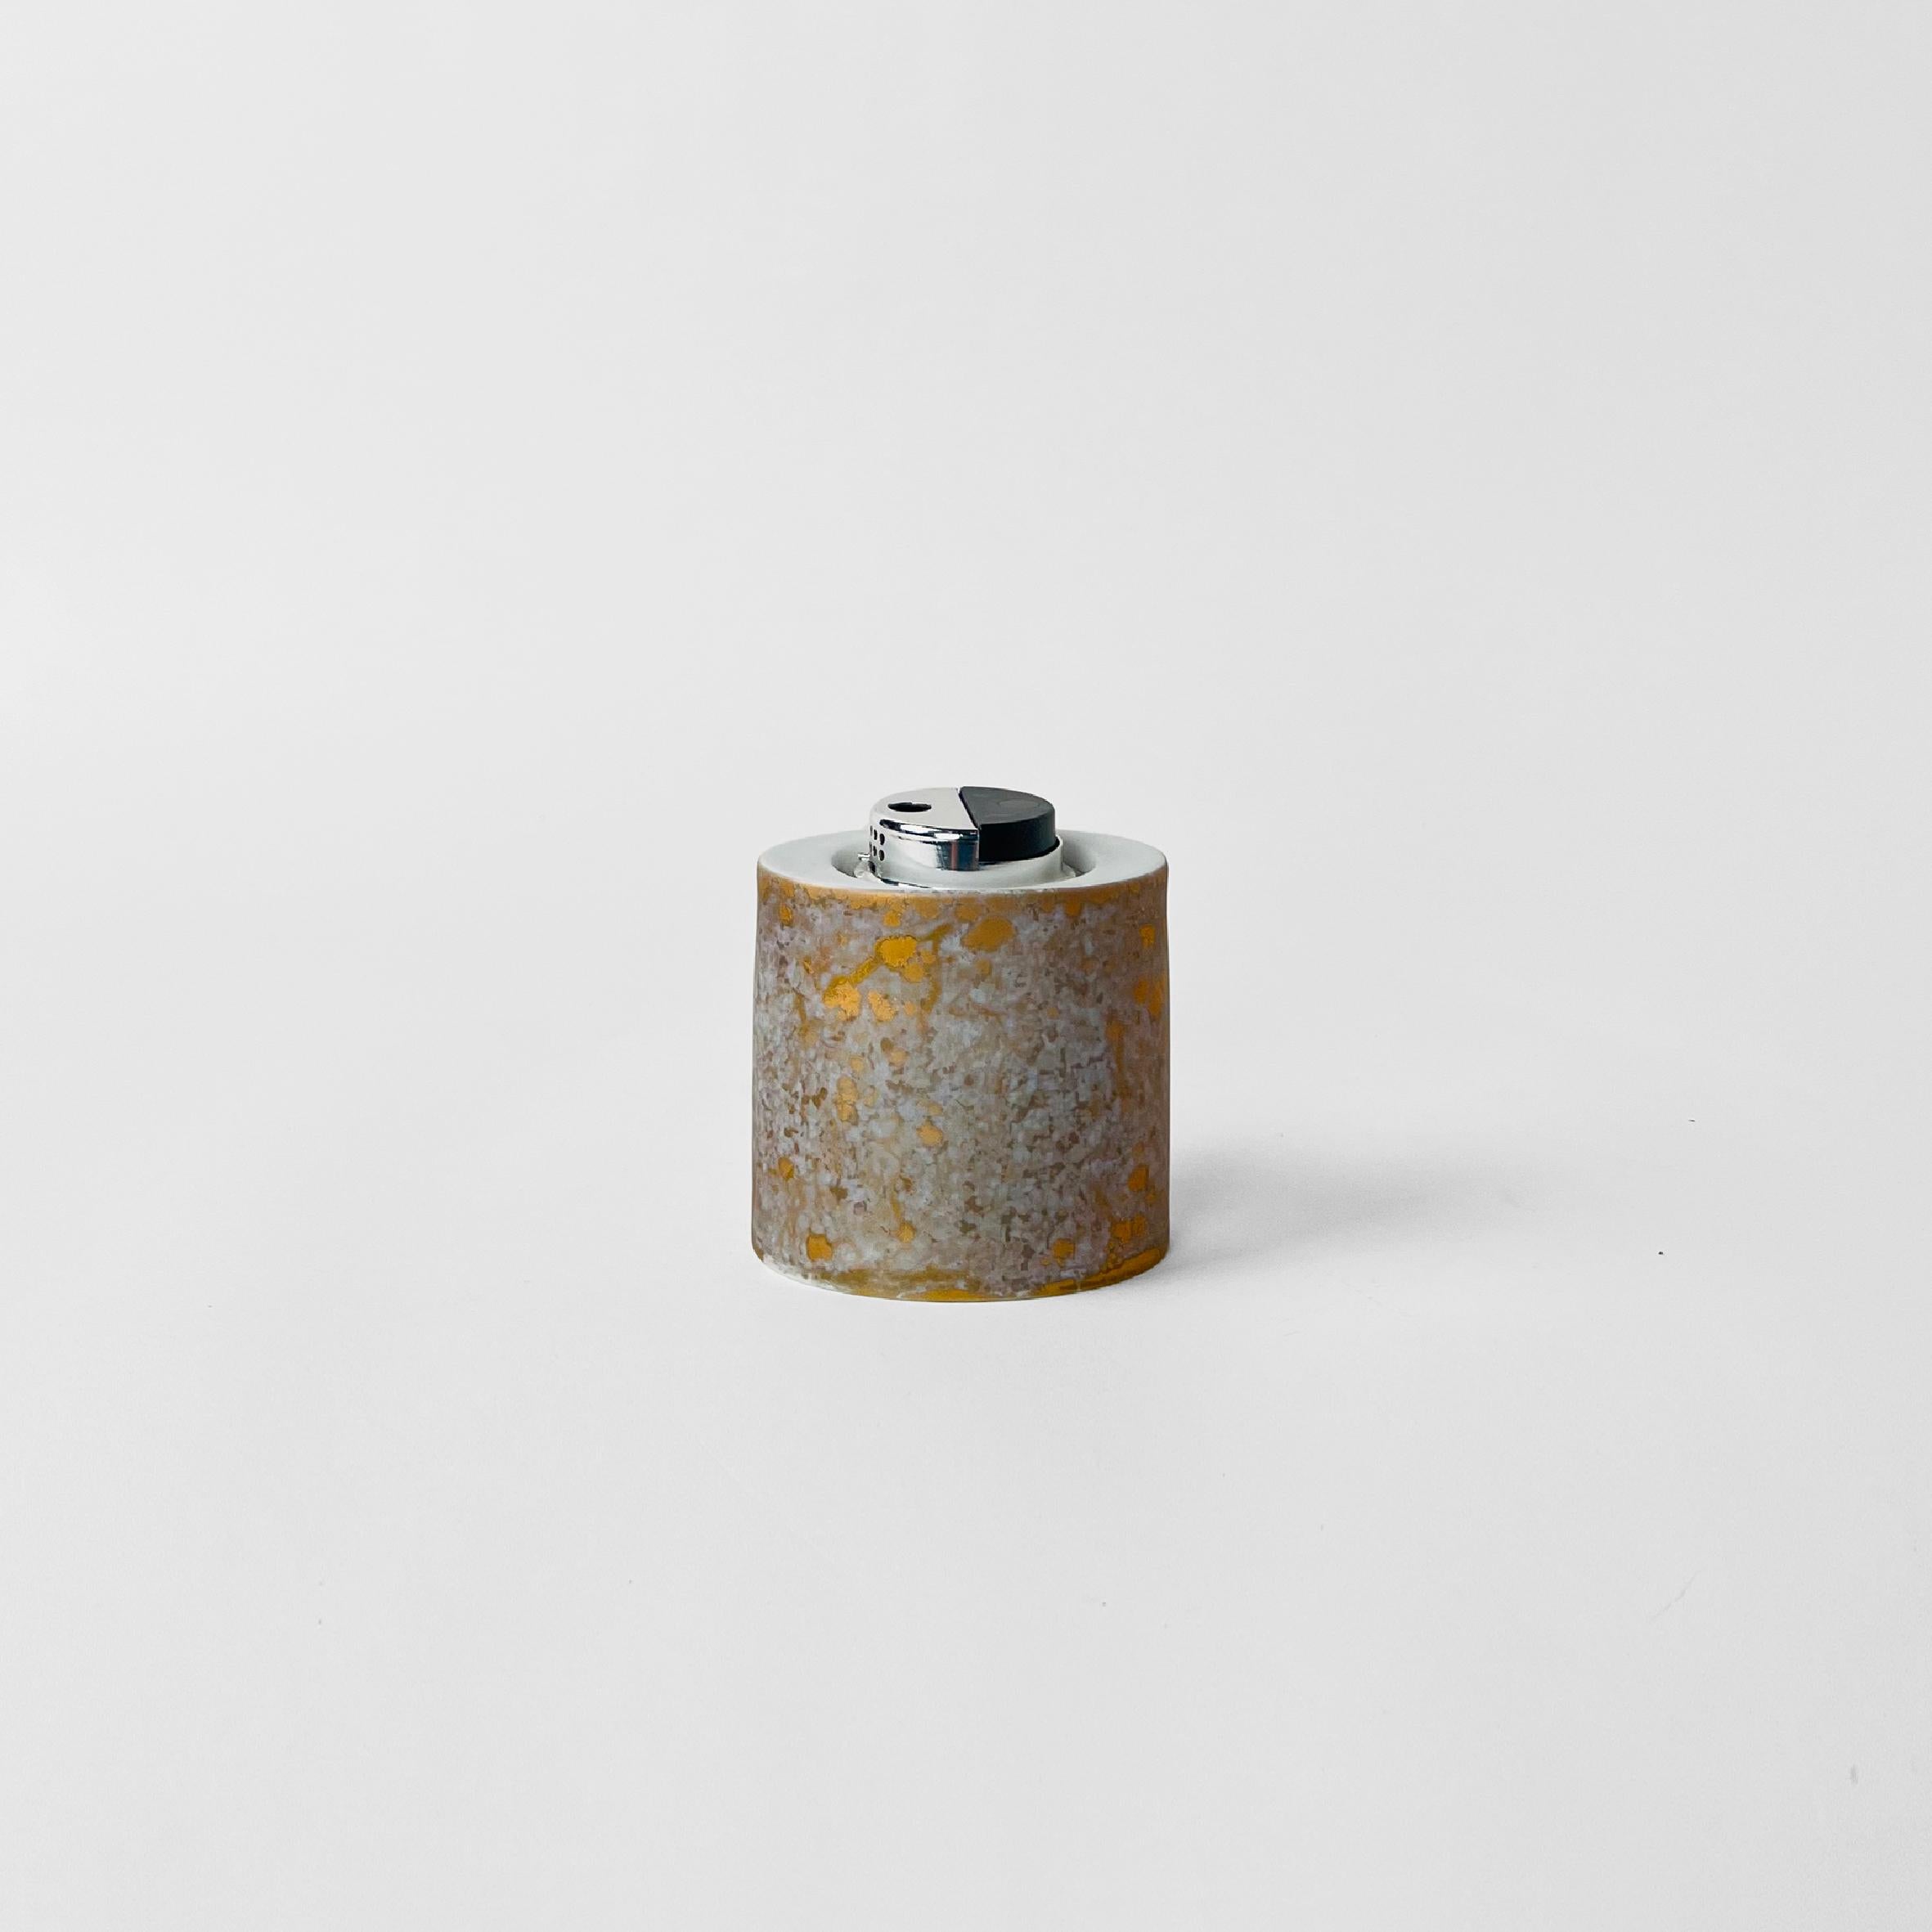 Table lighter with light grey and golden pattern. Designed by H. Drexler for Rosenthal. Made in Germany, circa 1970.